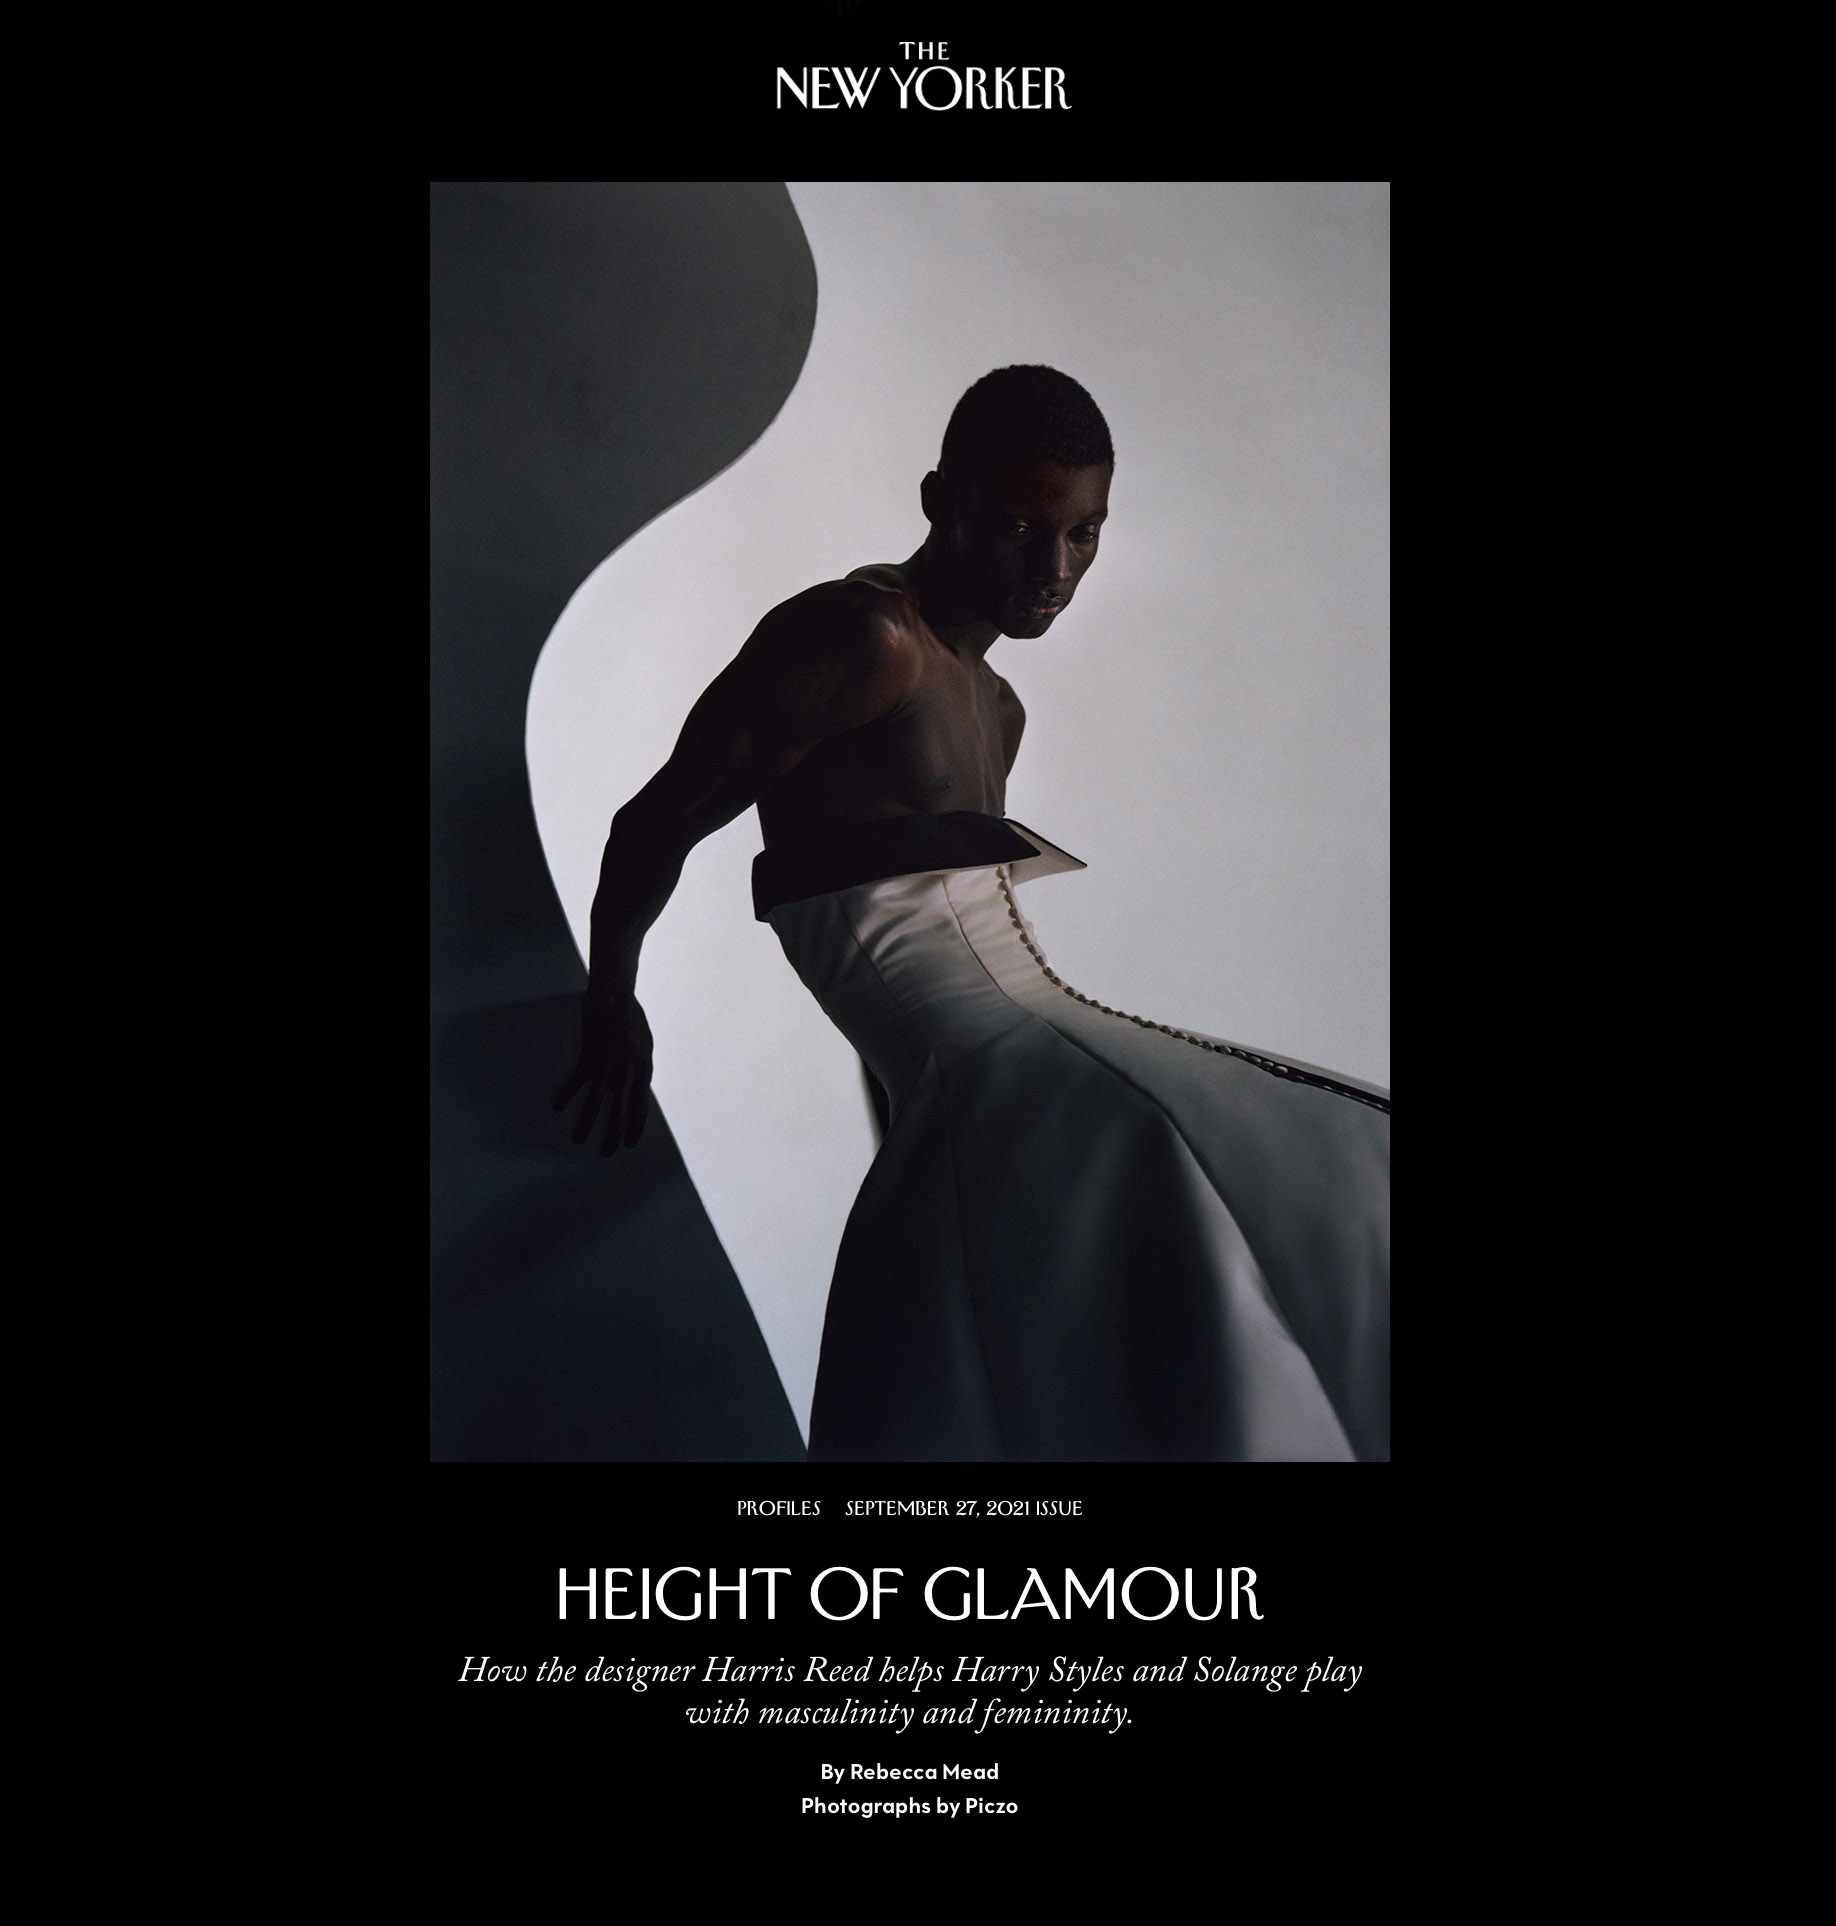 "Height of Glamour," photographs by Piczo, September 20 at newyorker.com